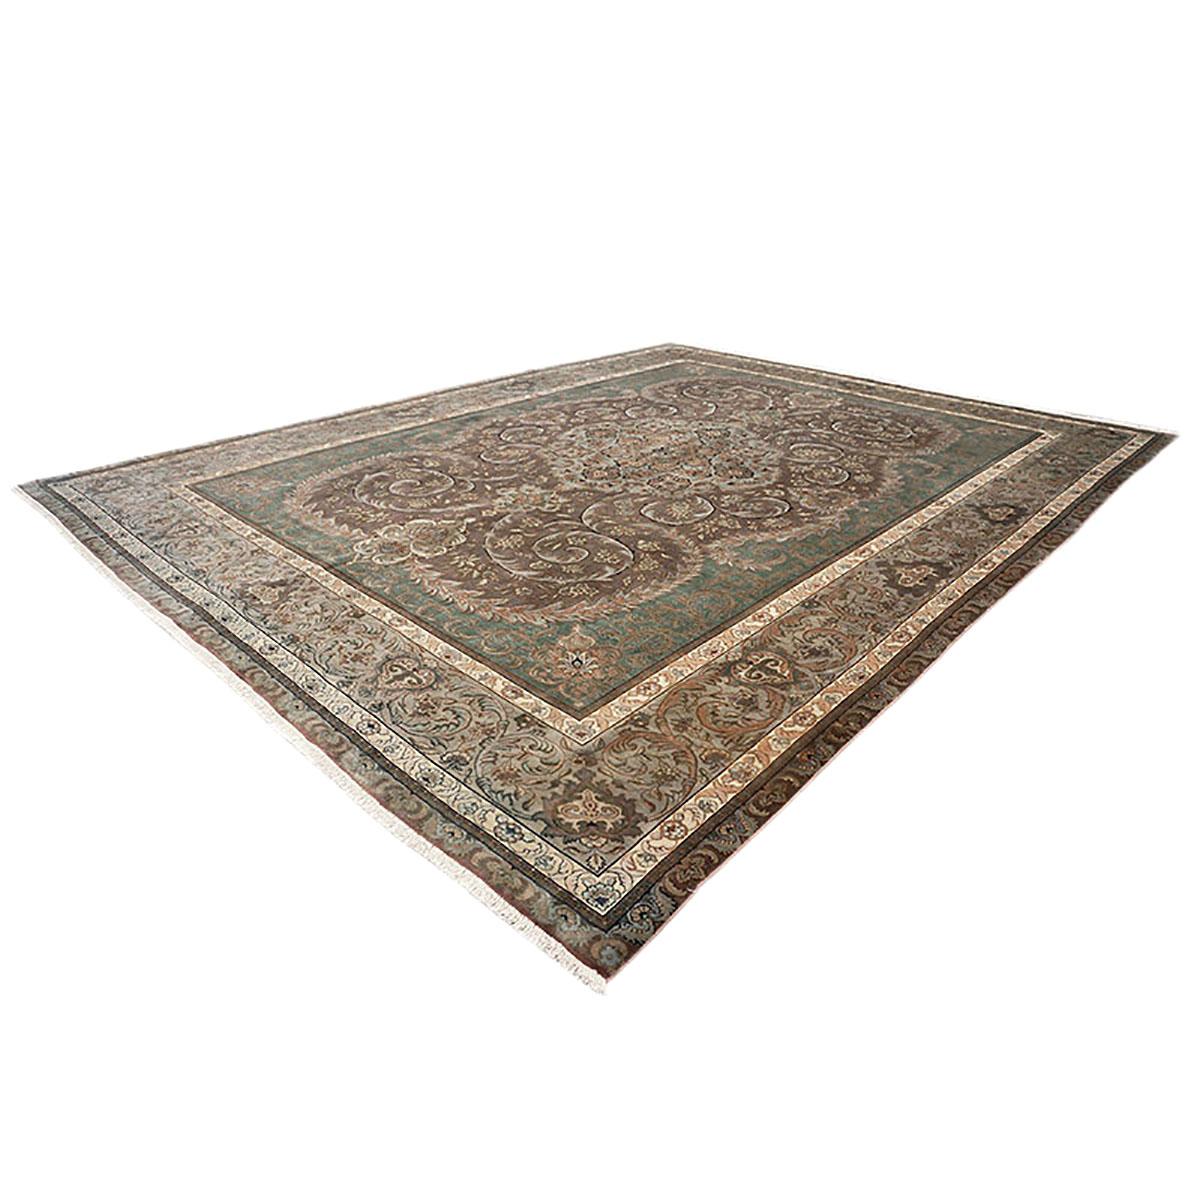 Antique Persian Tabriz 9x12 Green, Brown, & Taupe Handmade Area Rug For Sale 1